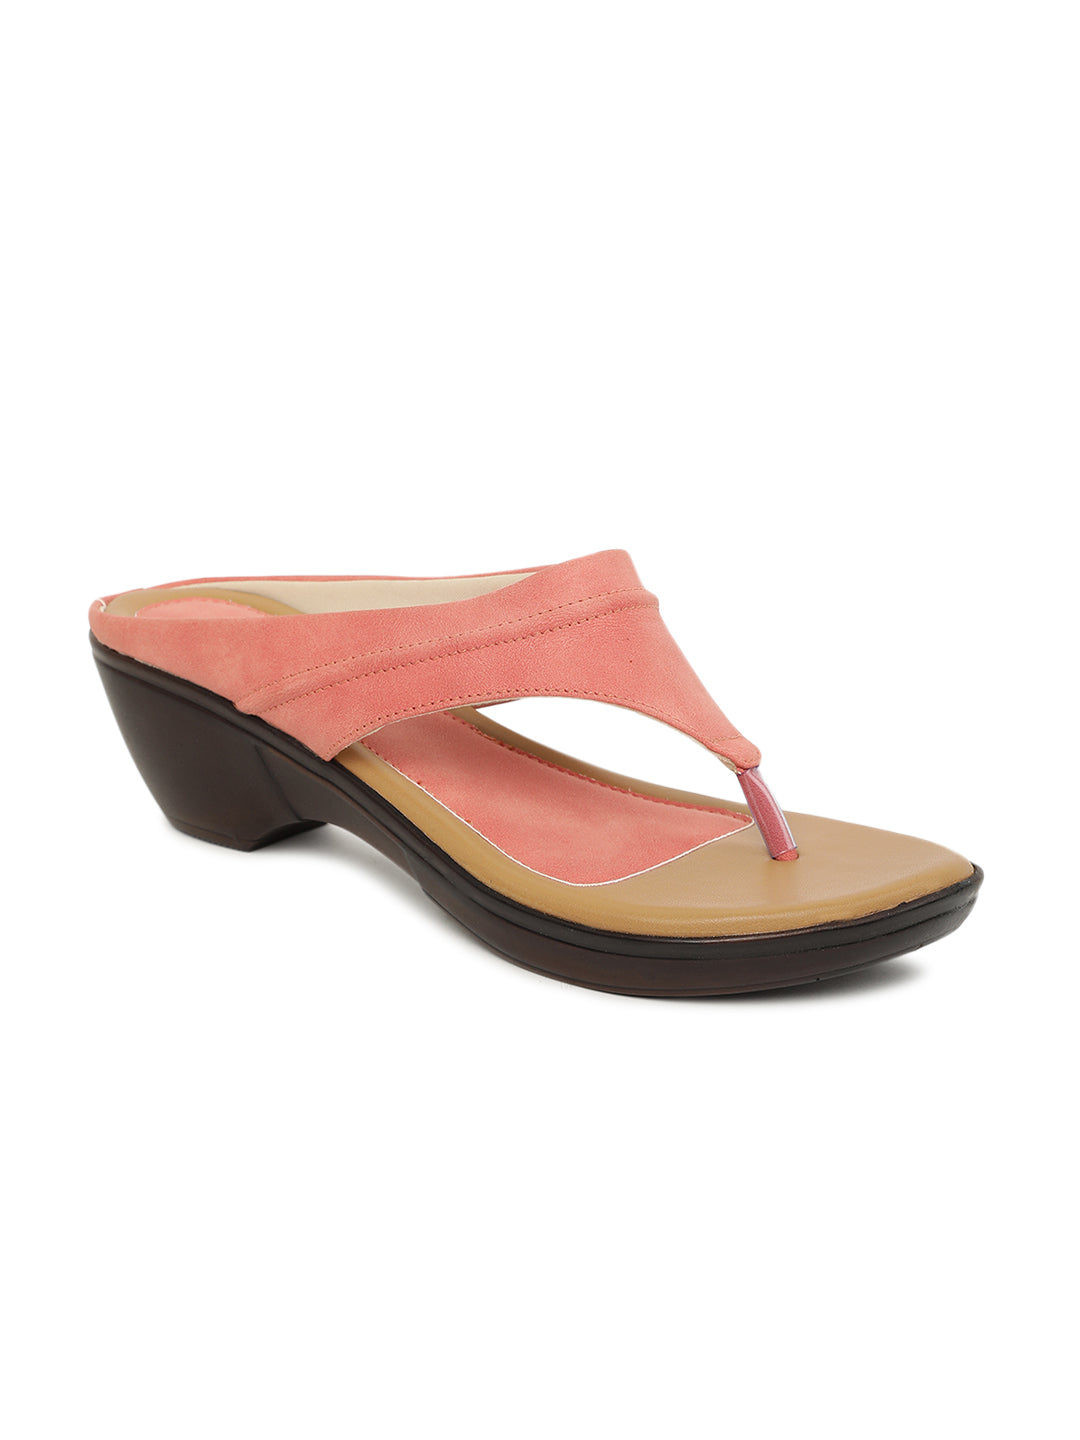 Paragon R10559L Women Sandals | Casual &amp; Formal Sandals | Stylish, Comfortable &amp; Durable | For Daily &amp; Occasion Wear